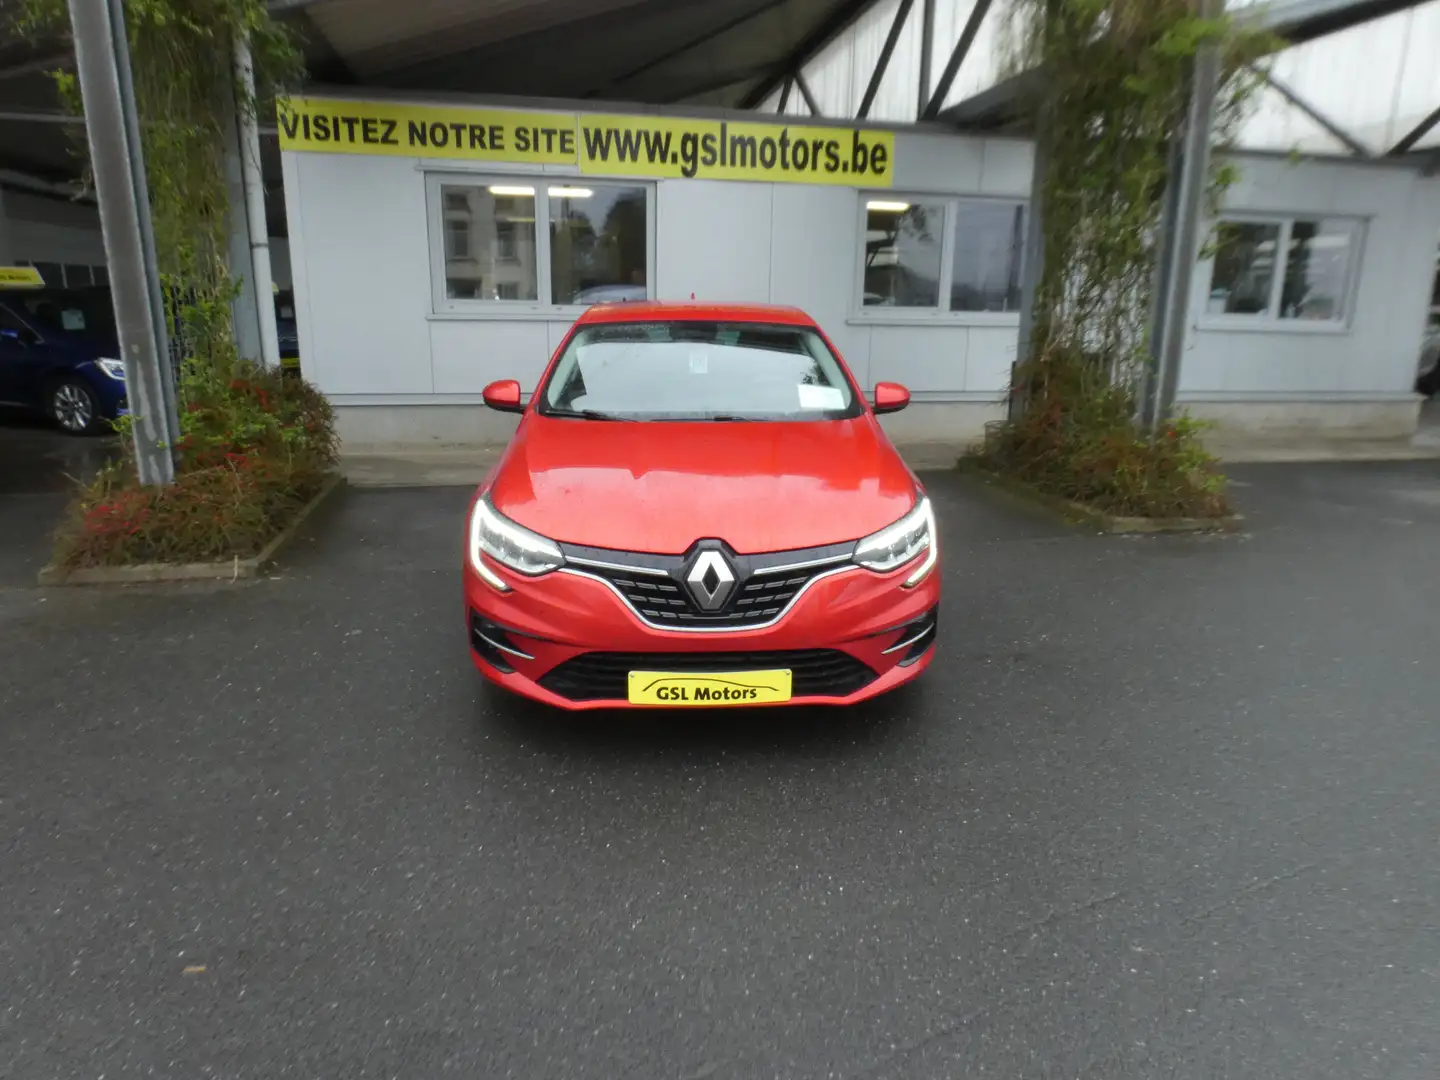 Renault Megane 1.5dCi115 bordeaux 06/21 65.659km Airco Cruise GPS Red - 2